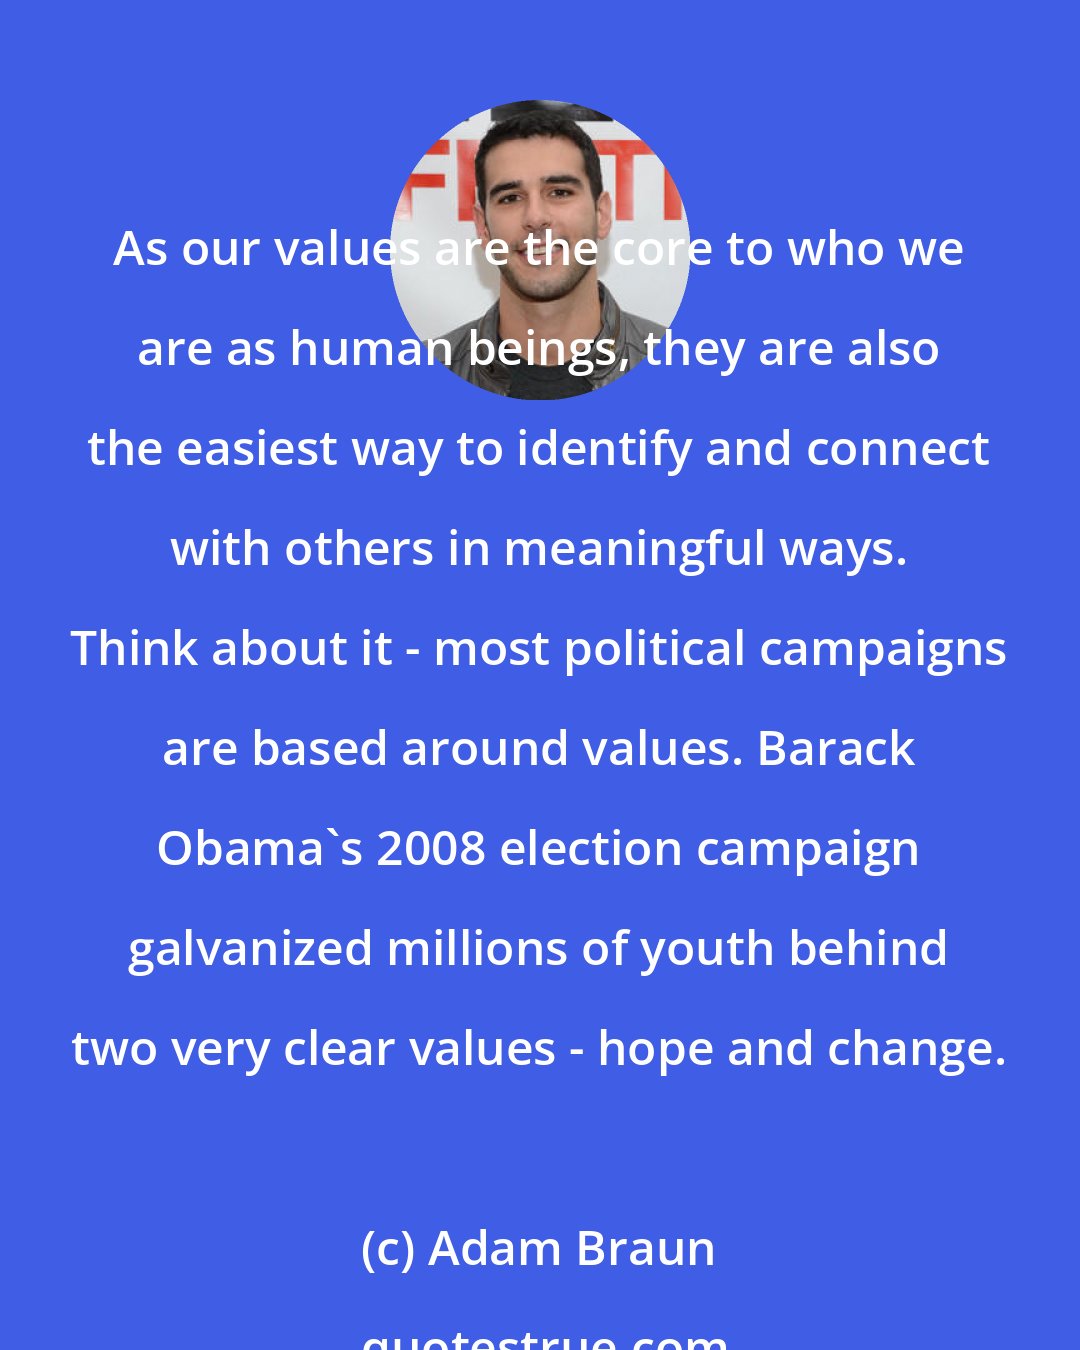 Adam Braun: As our values are the core to who we are as human beings, they are also the easiest way to identify and connect with others in meaningful ways. Think about it - most political campaigns are based around values. Barack Obama's 2008 election campaign galvanized millions of youth behind two very clear values - hope and change.